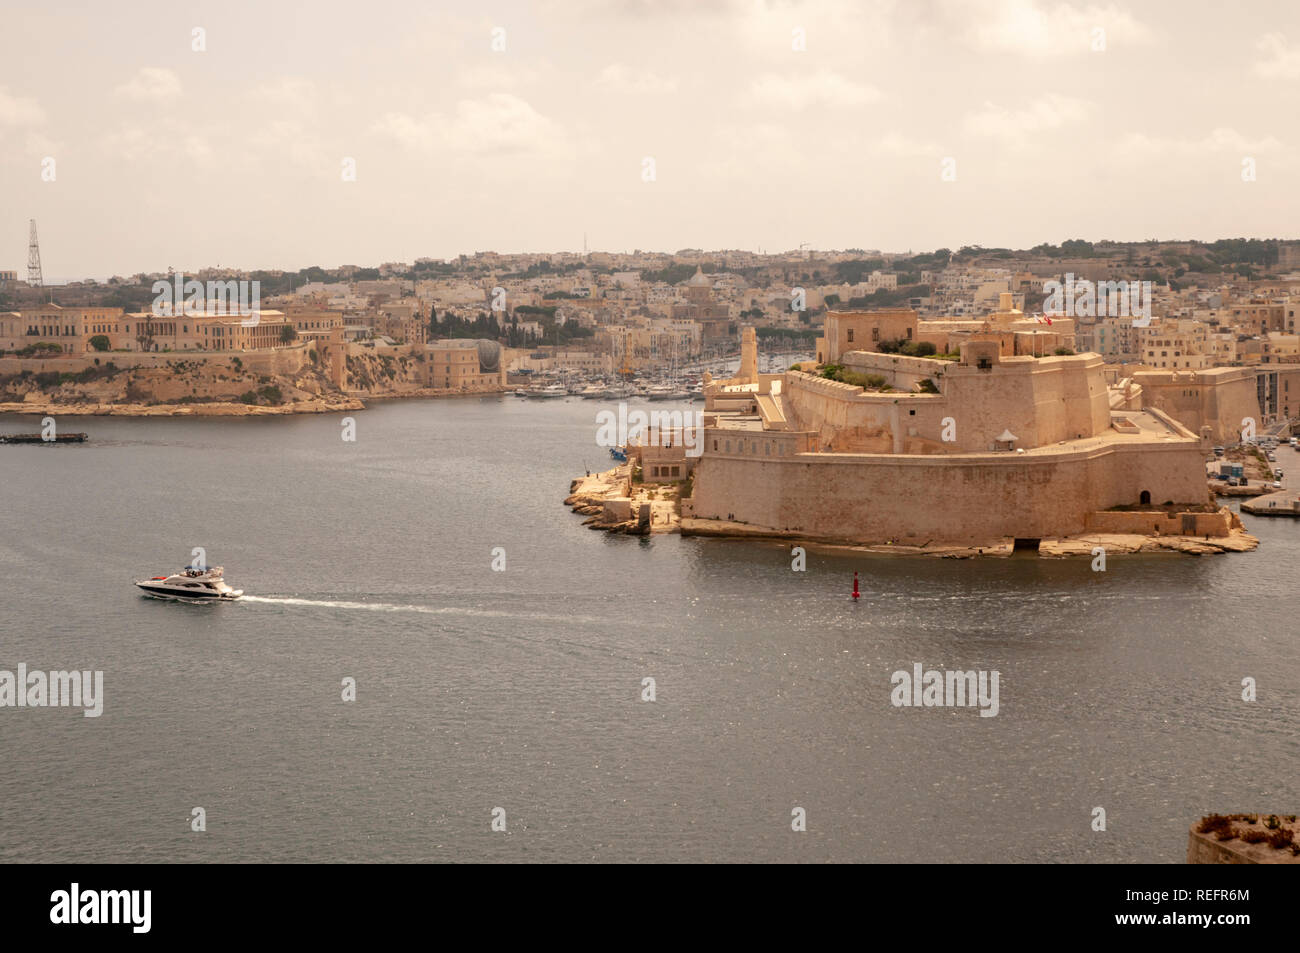 View over the Grand Harbour and Fort St. Angelo from Upper Barrakka Gardens in Valletta, Malta. Stock Photo